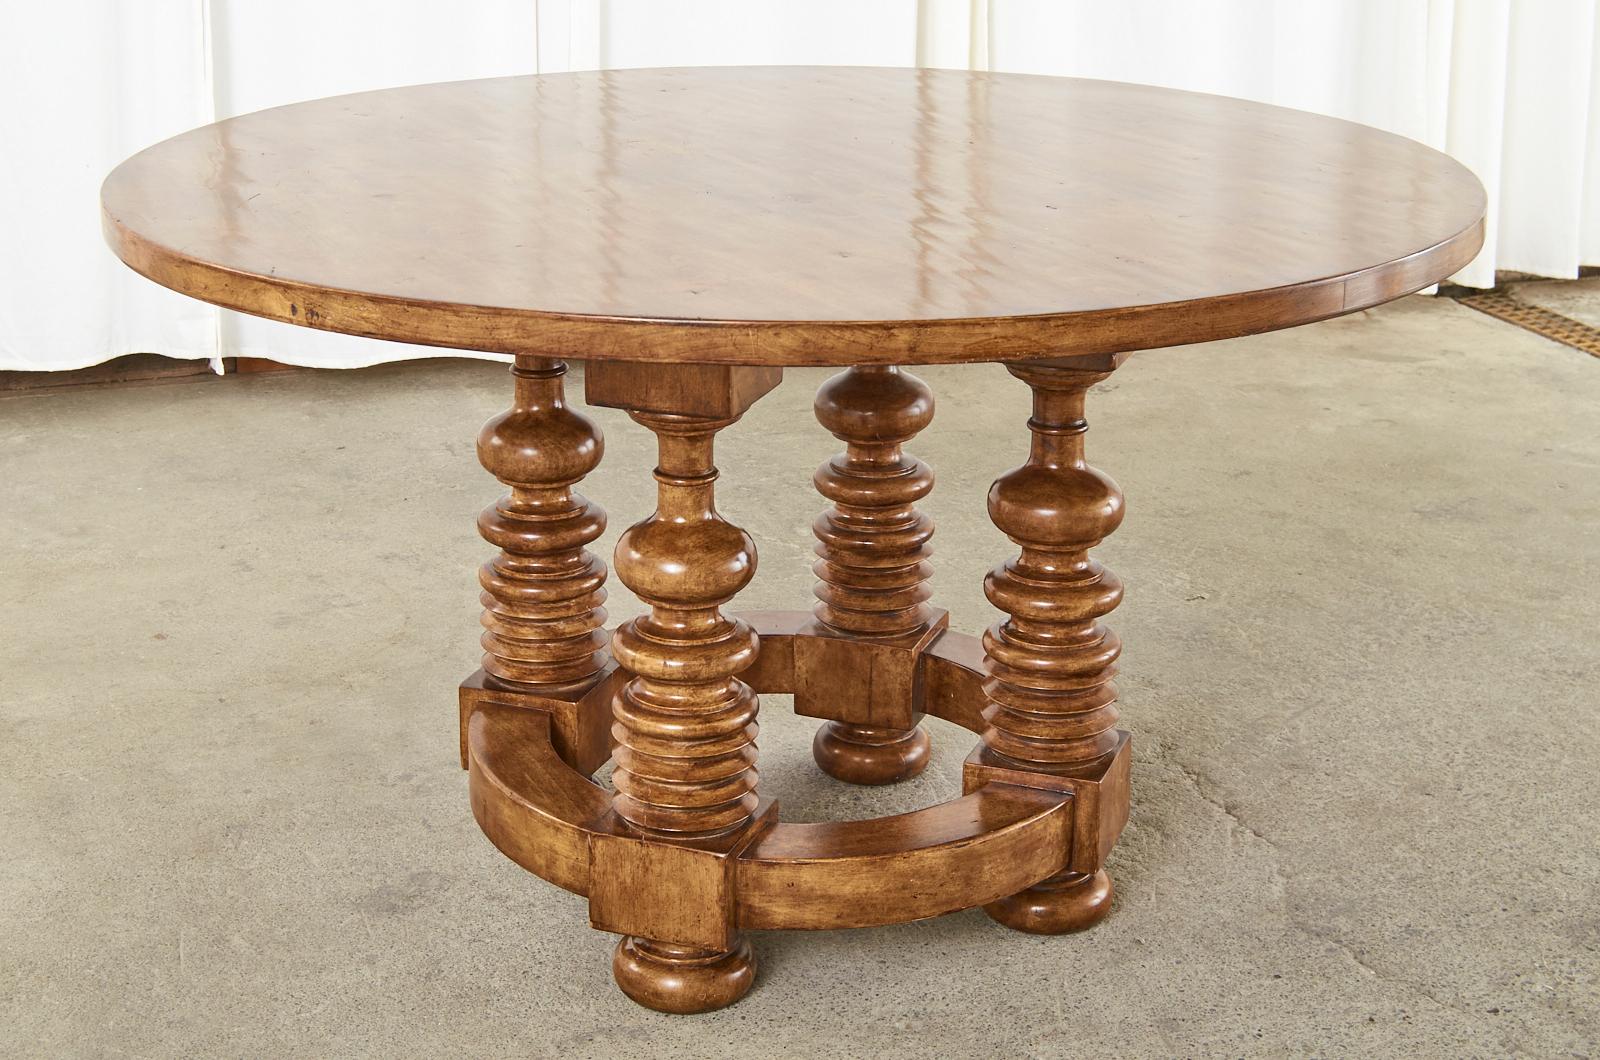 20th Century Portuguese Baroque Style Round Dining Room or Center Table